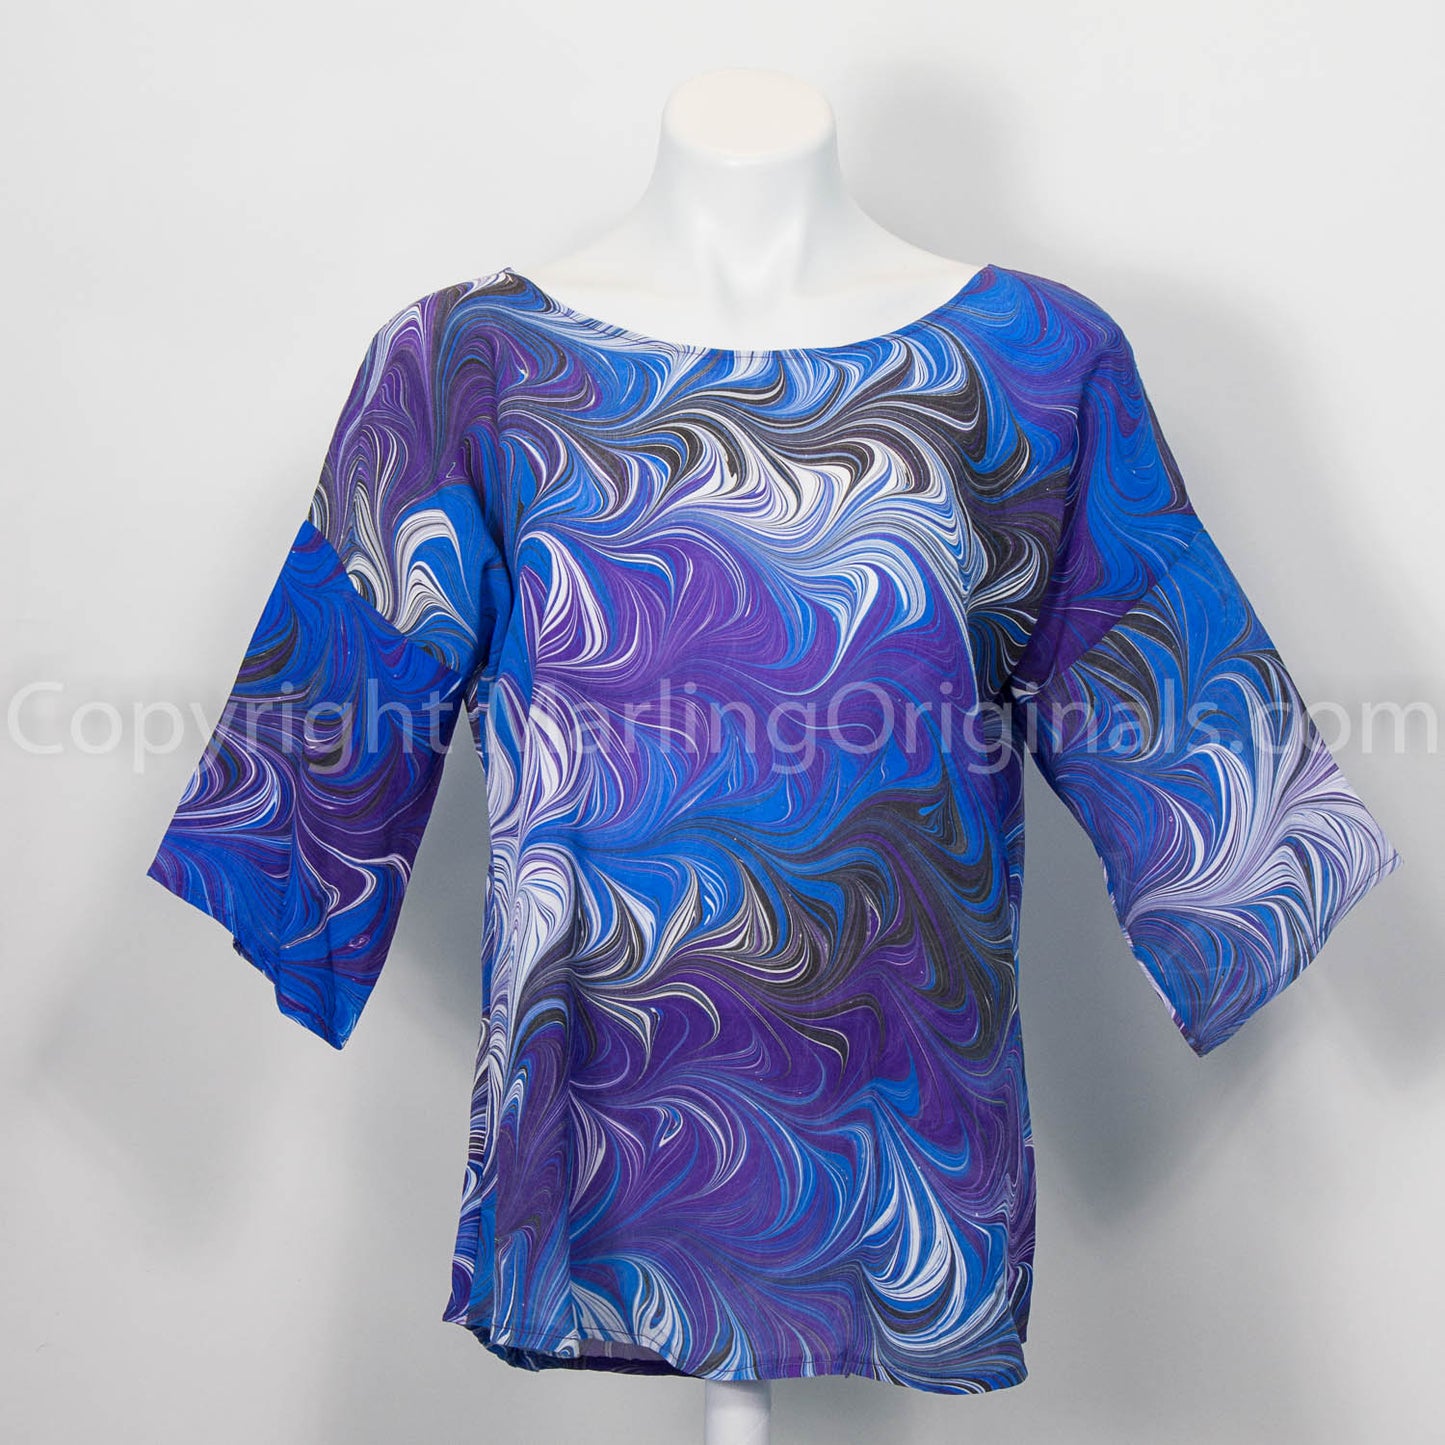 silk top marbled in rich blues and purple with white and black.  Dynamic twist pattern.